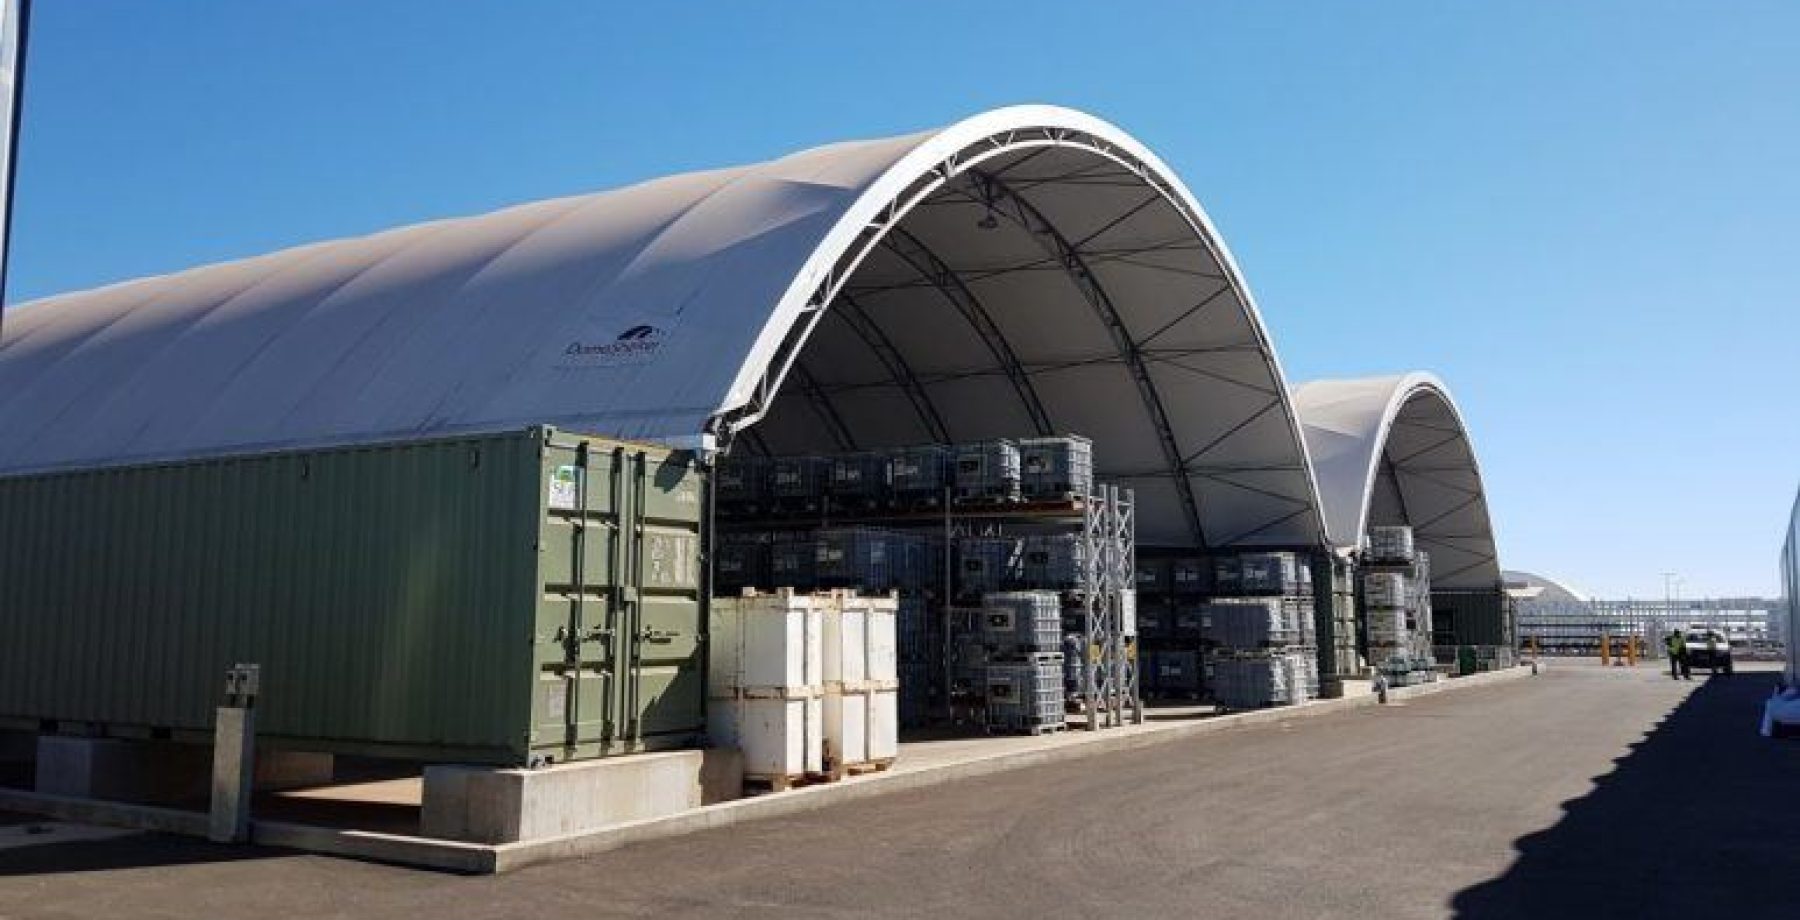 Fabric Structures as alternatives to steel buildings